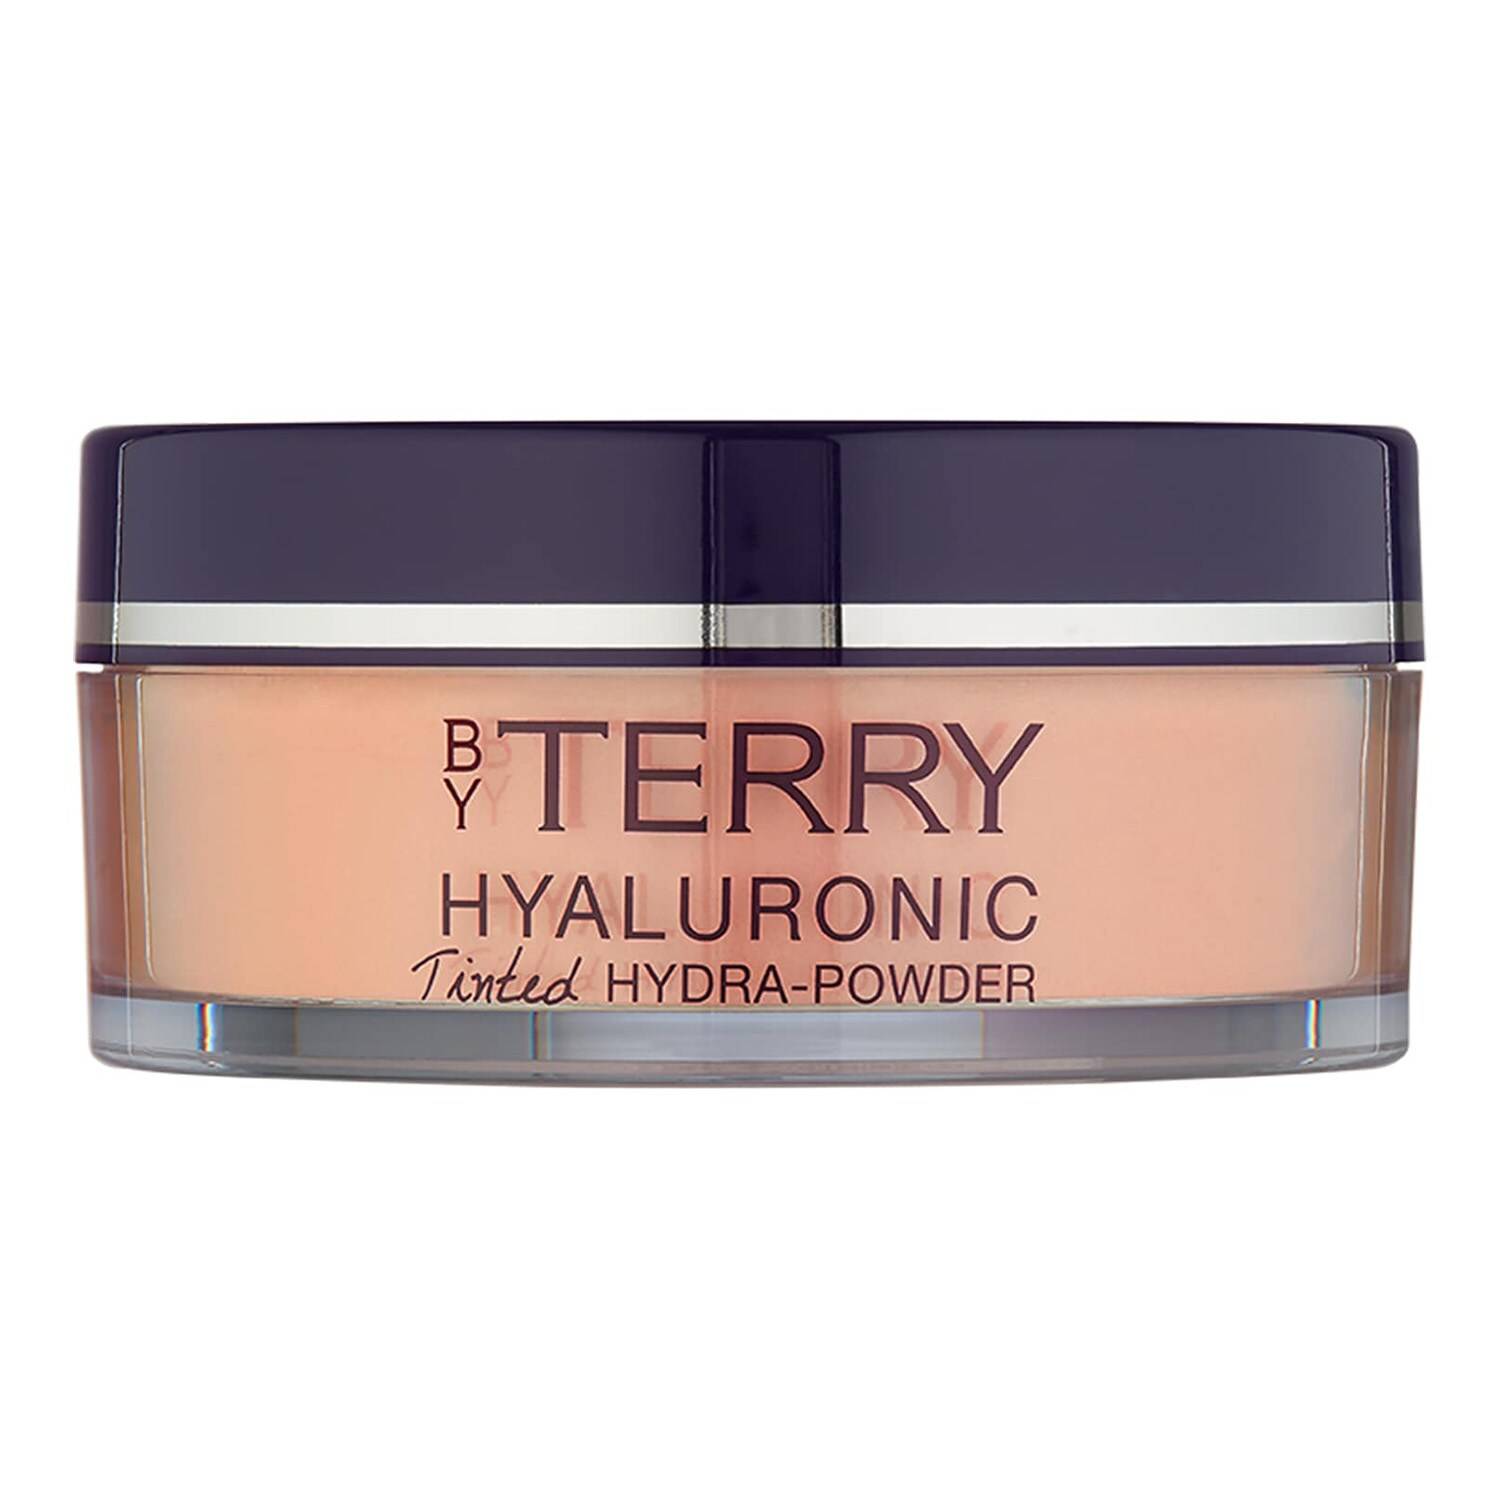 By Terry Hyaluronic Tinted Hydra-Powder 10G N2. Apricot Light